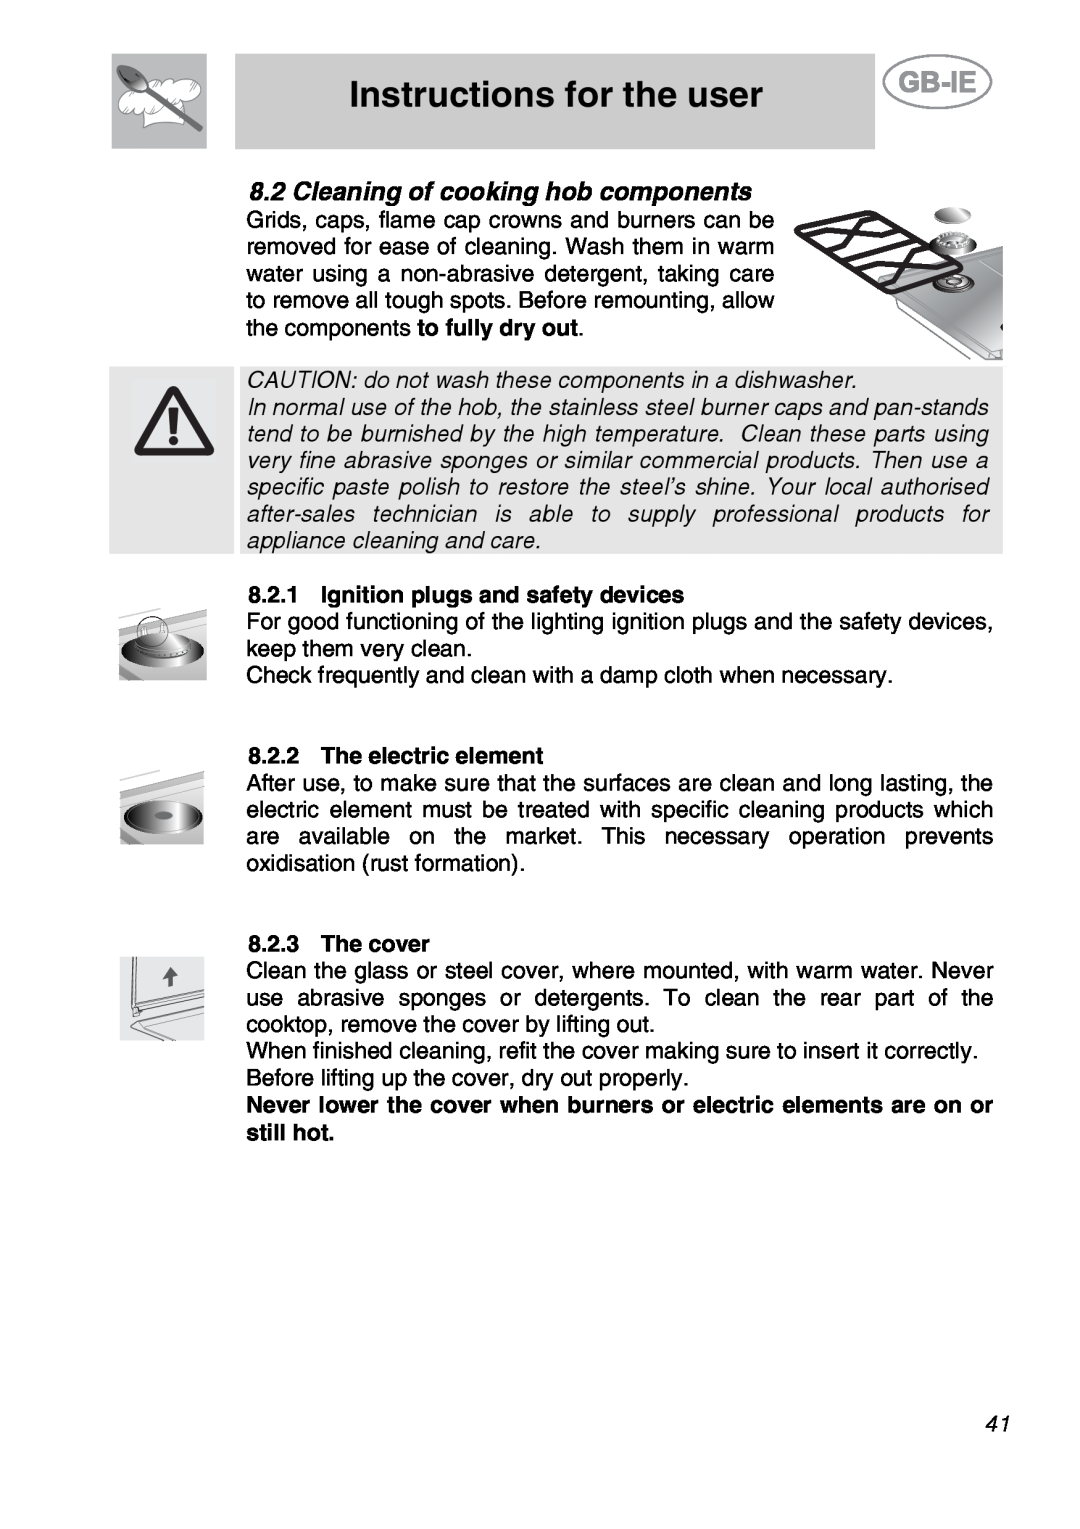 Smeg GCO90XG manual Instructions for the user, CAUTION do not wash these components in a dishwasher, The electric element 